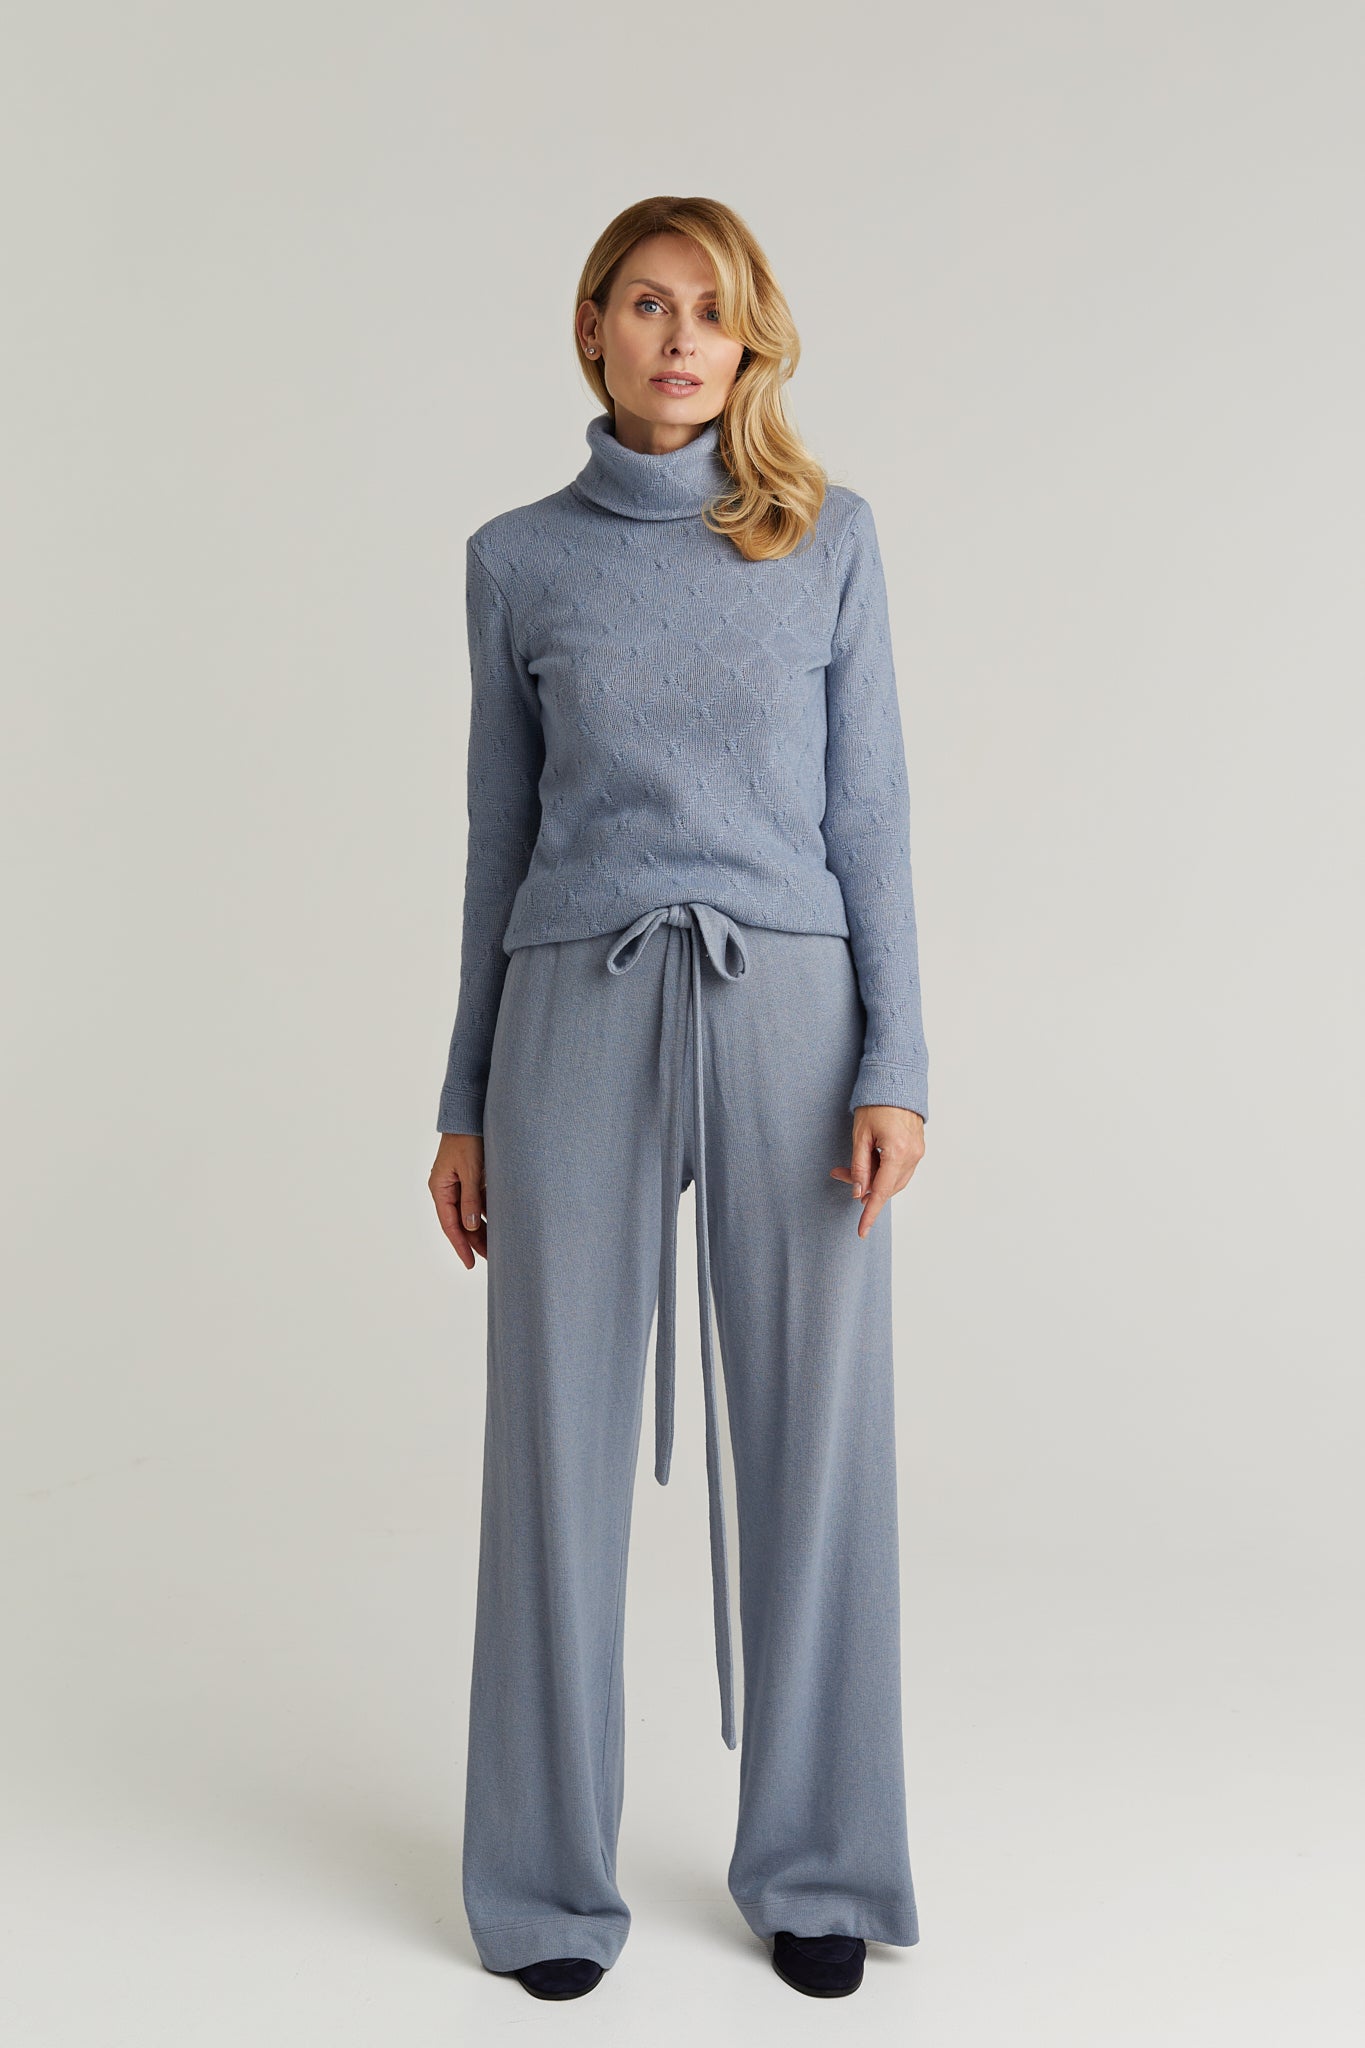 Gaudium Turtleneck Sweater With Pattern in Blue